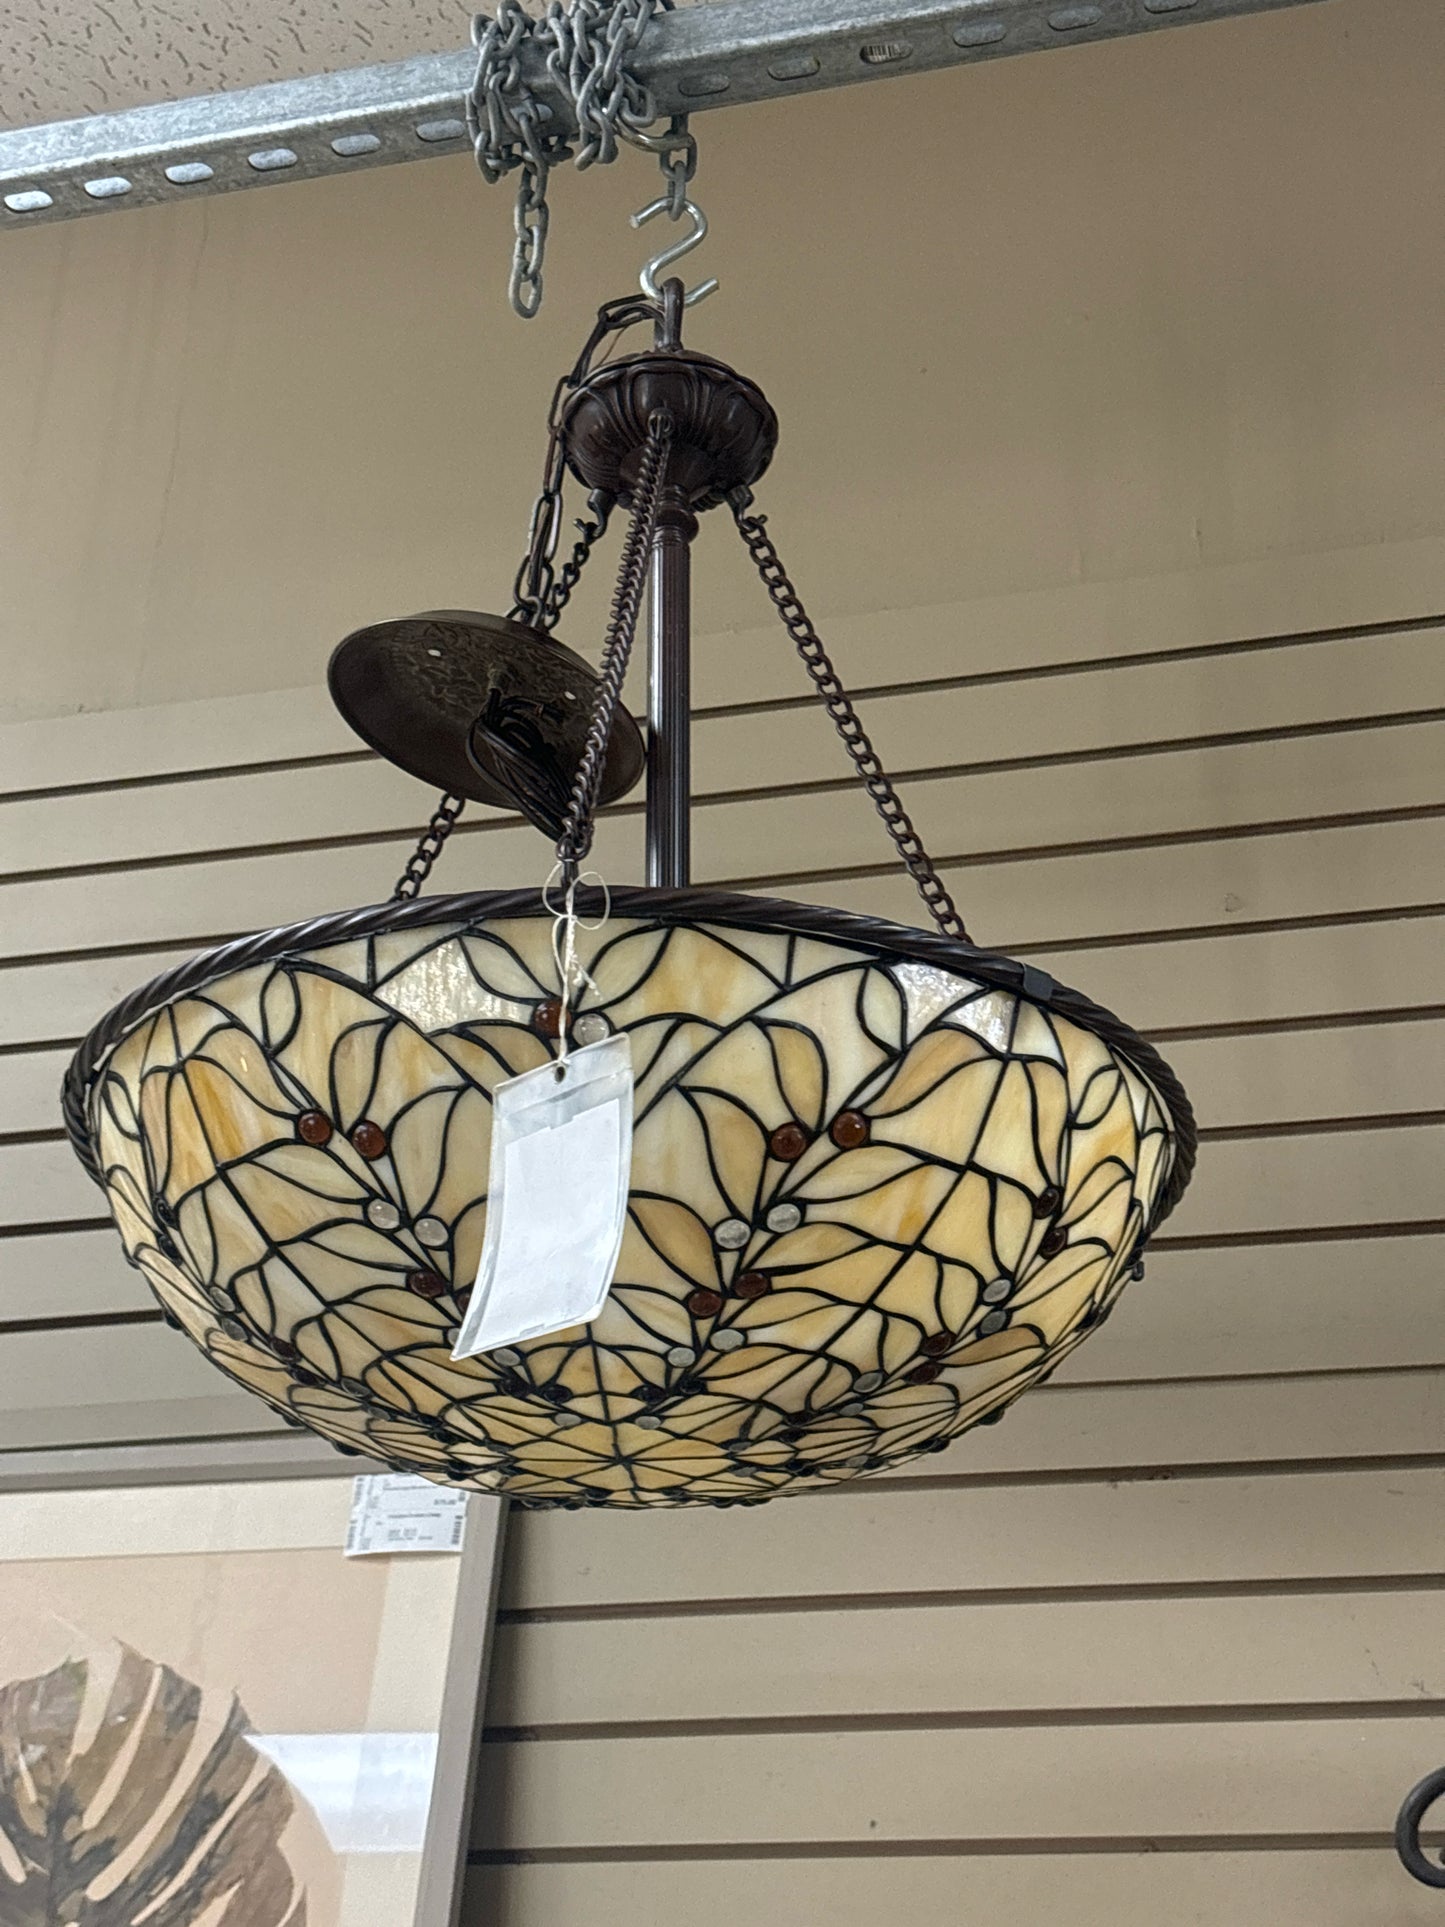 Brown & Tan Stained Glass Chandelier - Hardware @Desk